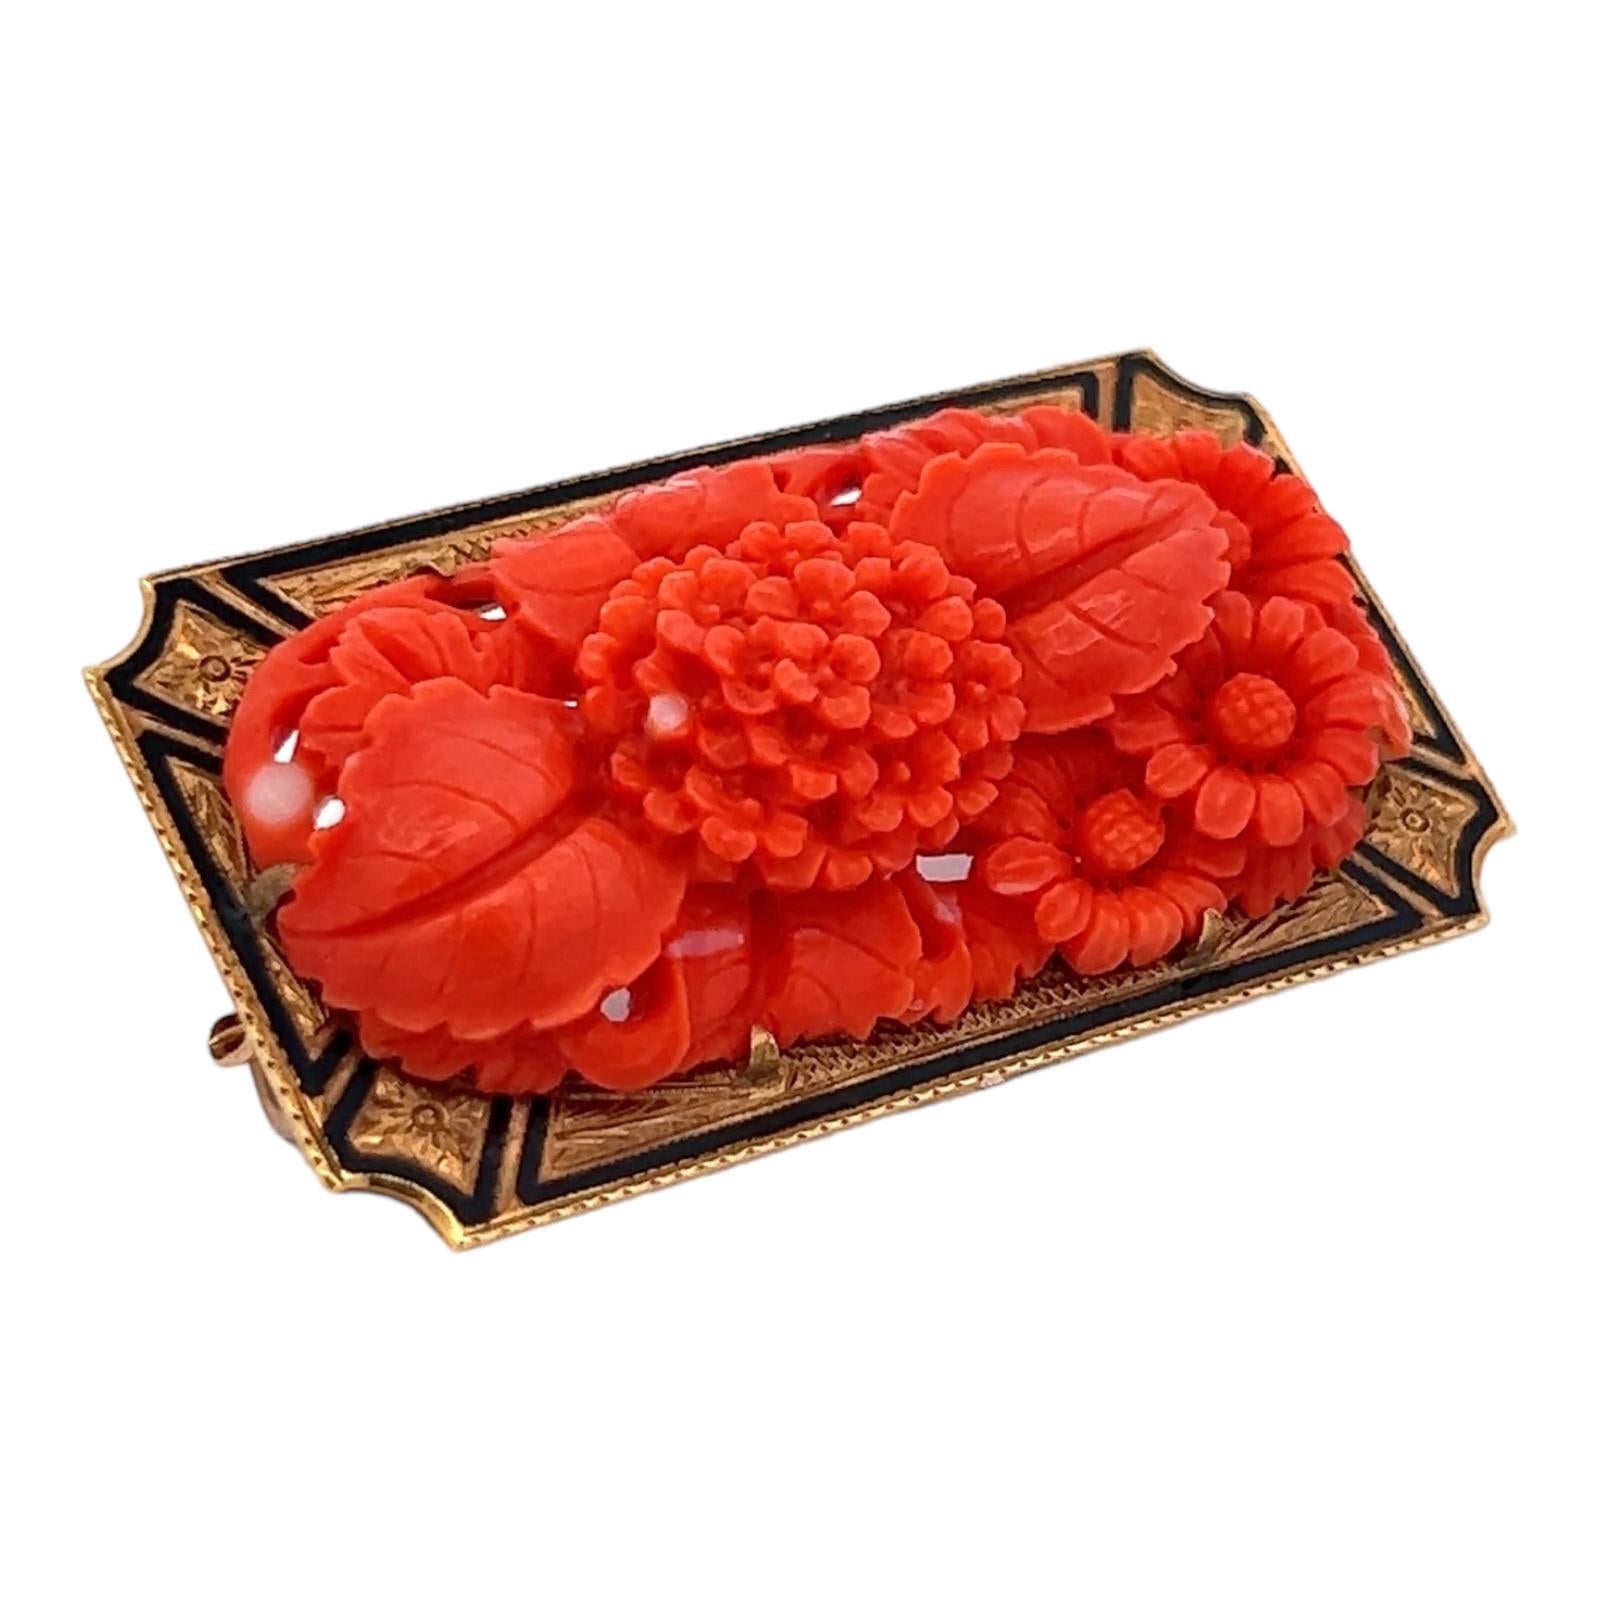 Beautifully carved coral and enamel brooch handcrafted in 18 karat yellow gold. The Mid-20th Century brooch features carved coral flowers and black enamel accents. The pin measures 4.50 x 2.50 inches. 